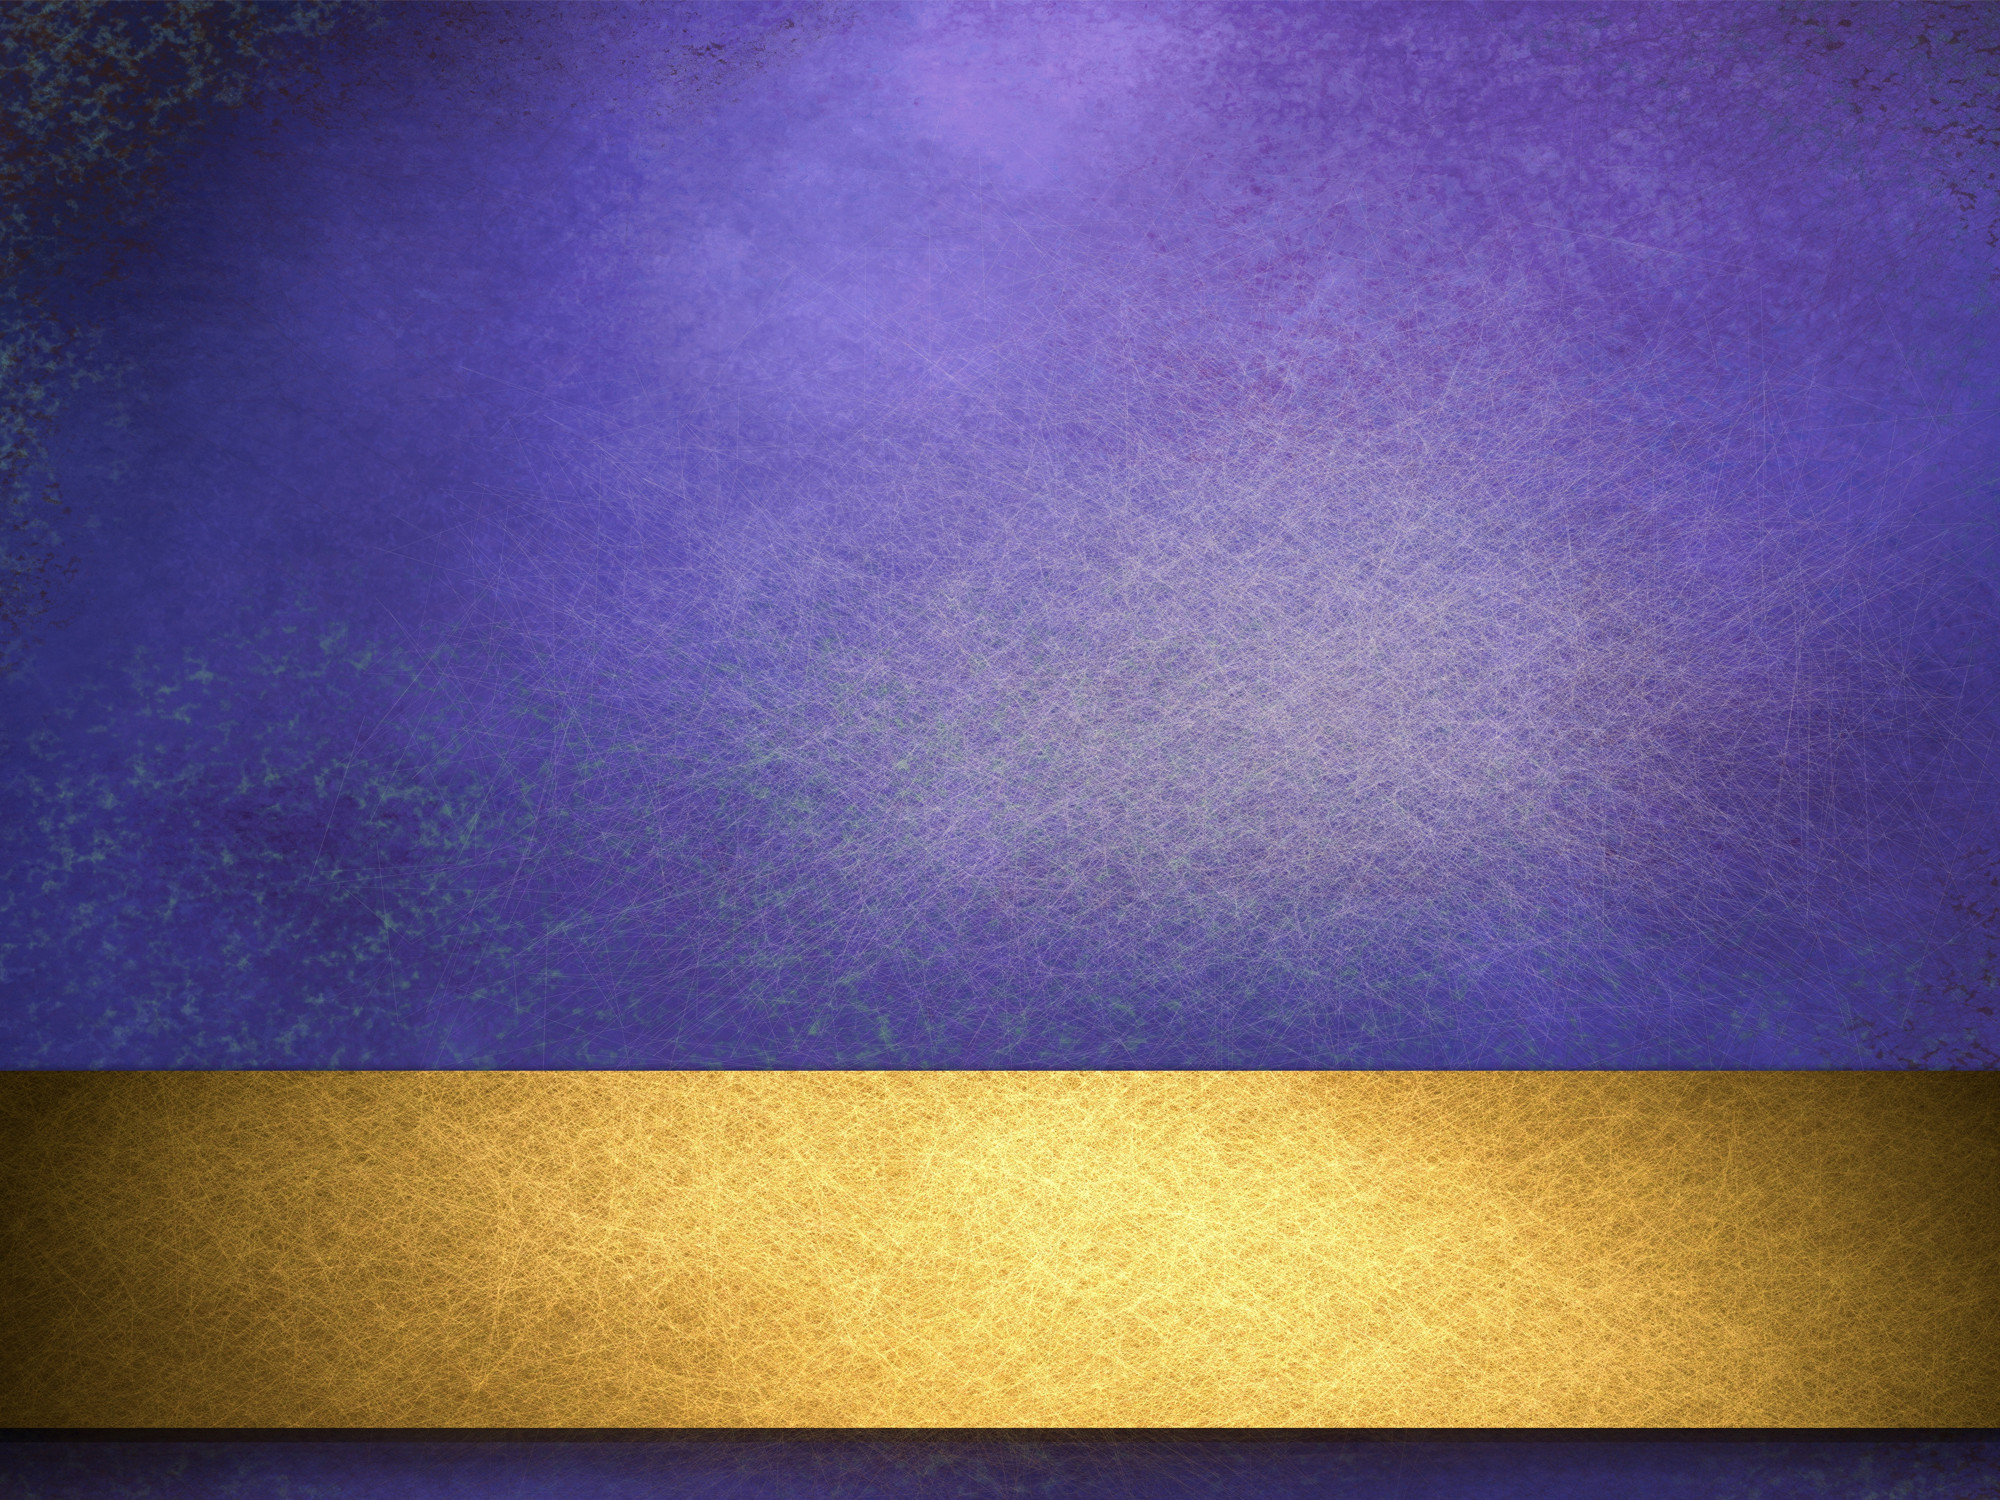  Blue  and Gold  Backgrounds    WallpaperTag